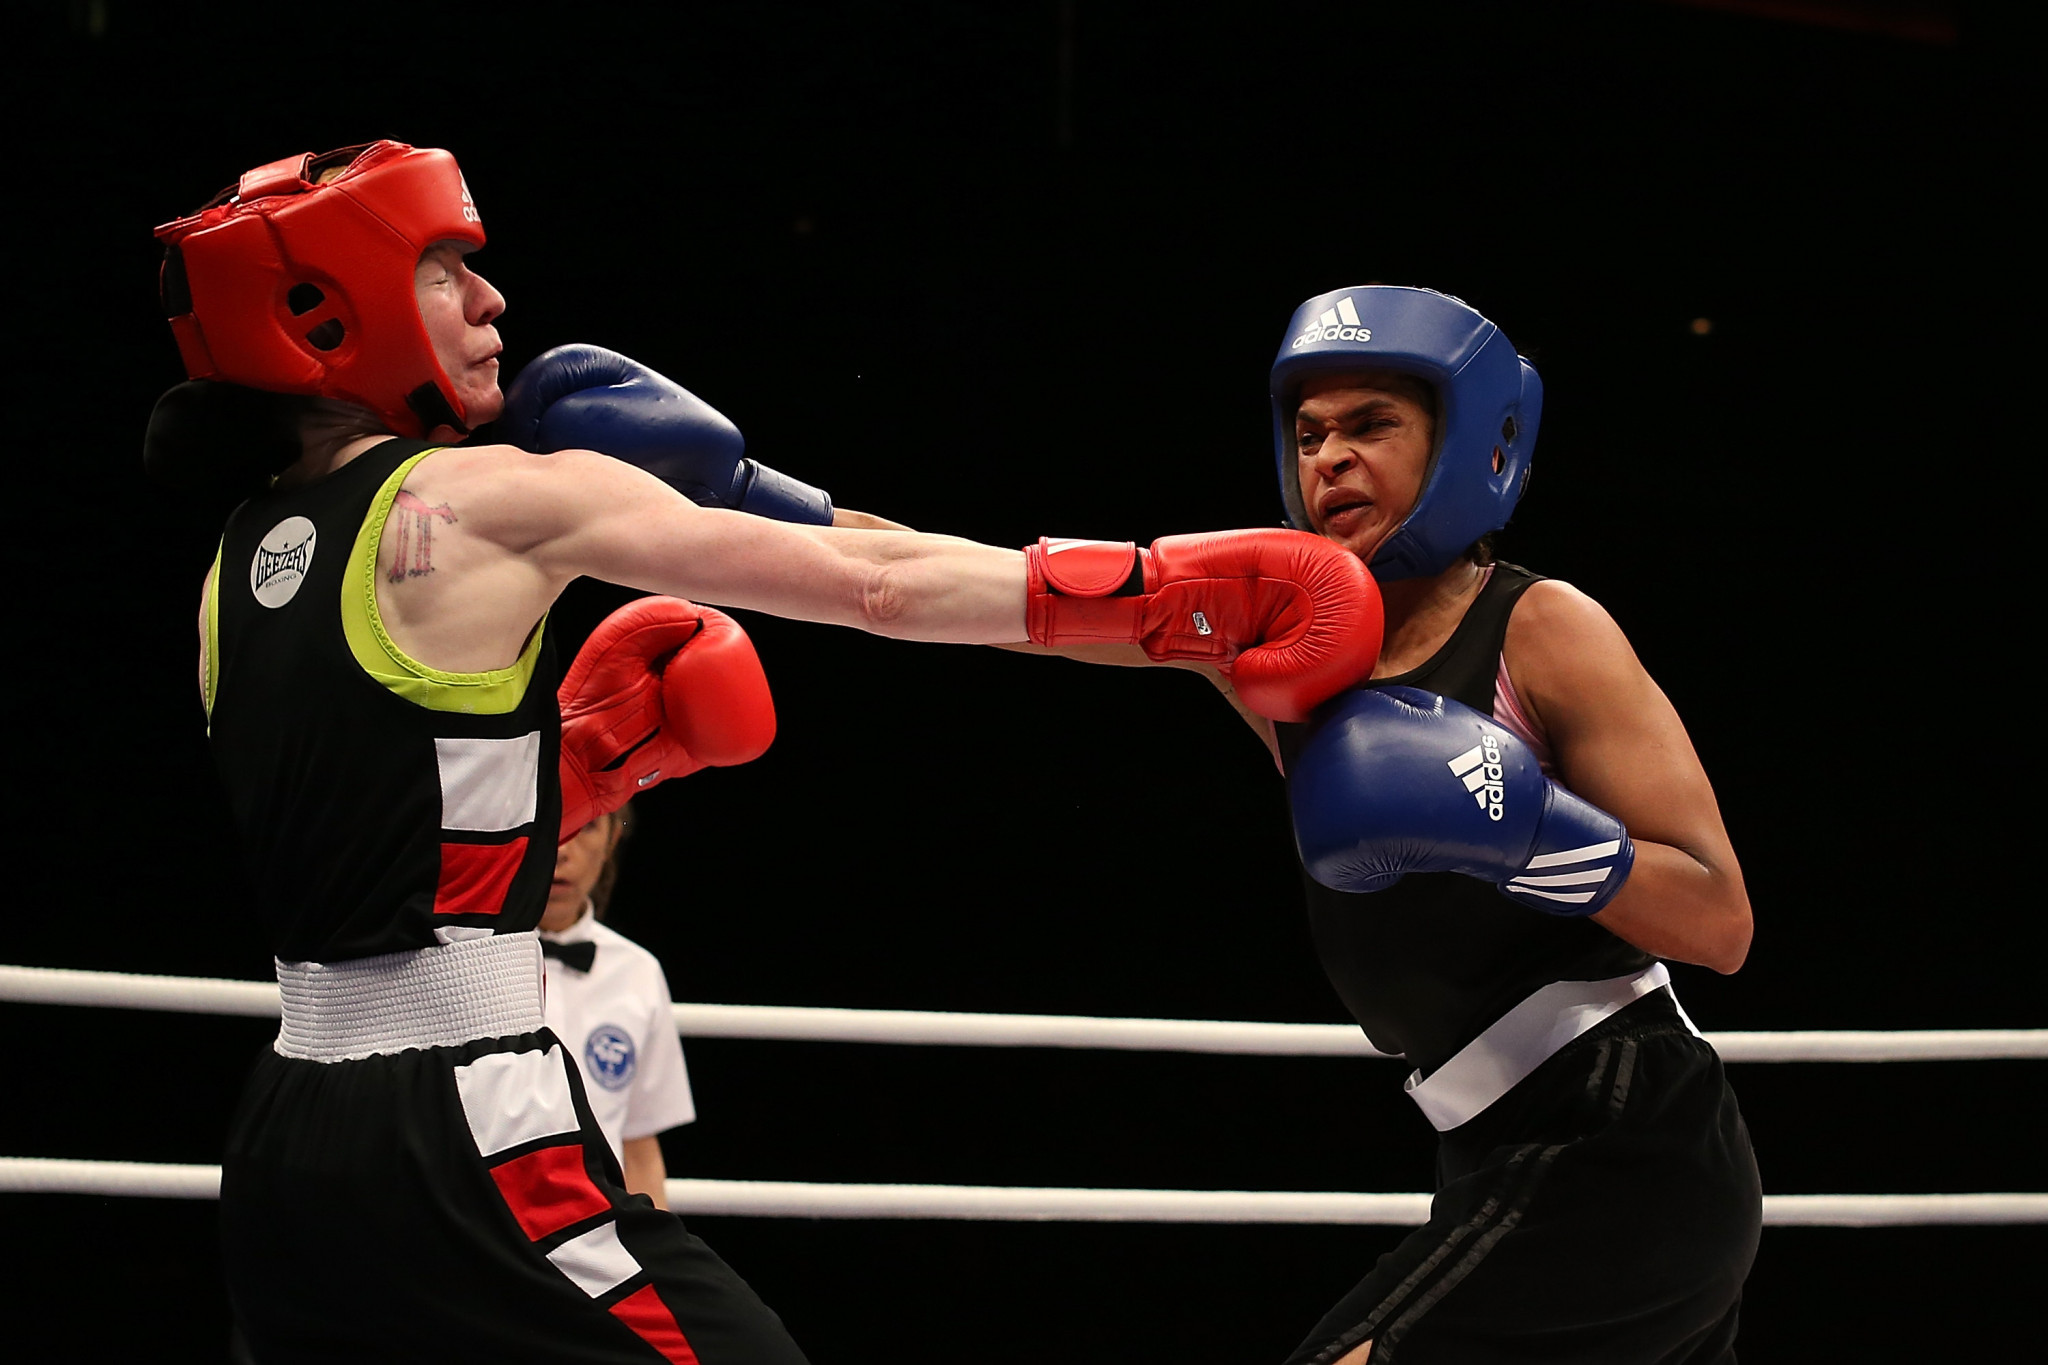 Somalian star Ramla Ali claimed victory in her opening bout of the African Olympic boxing qualifier in Dakar to progress to the quarter-finals ©Getty Images